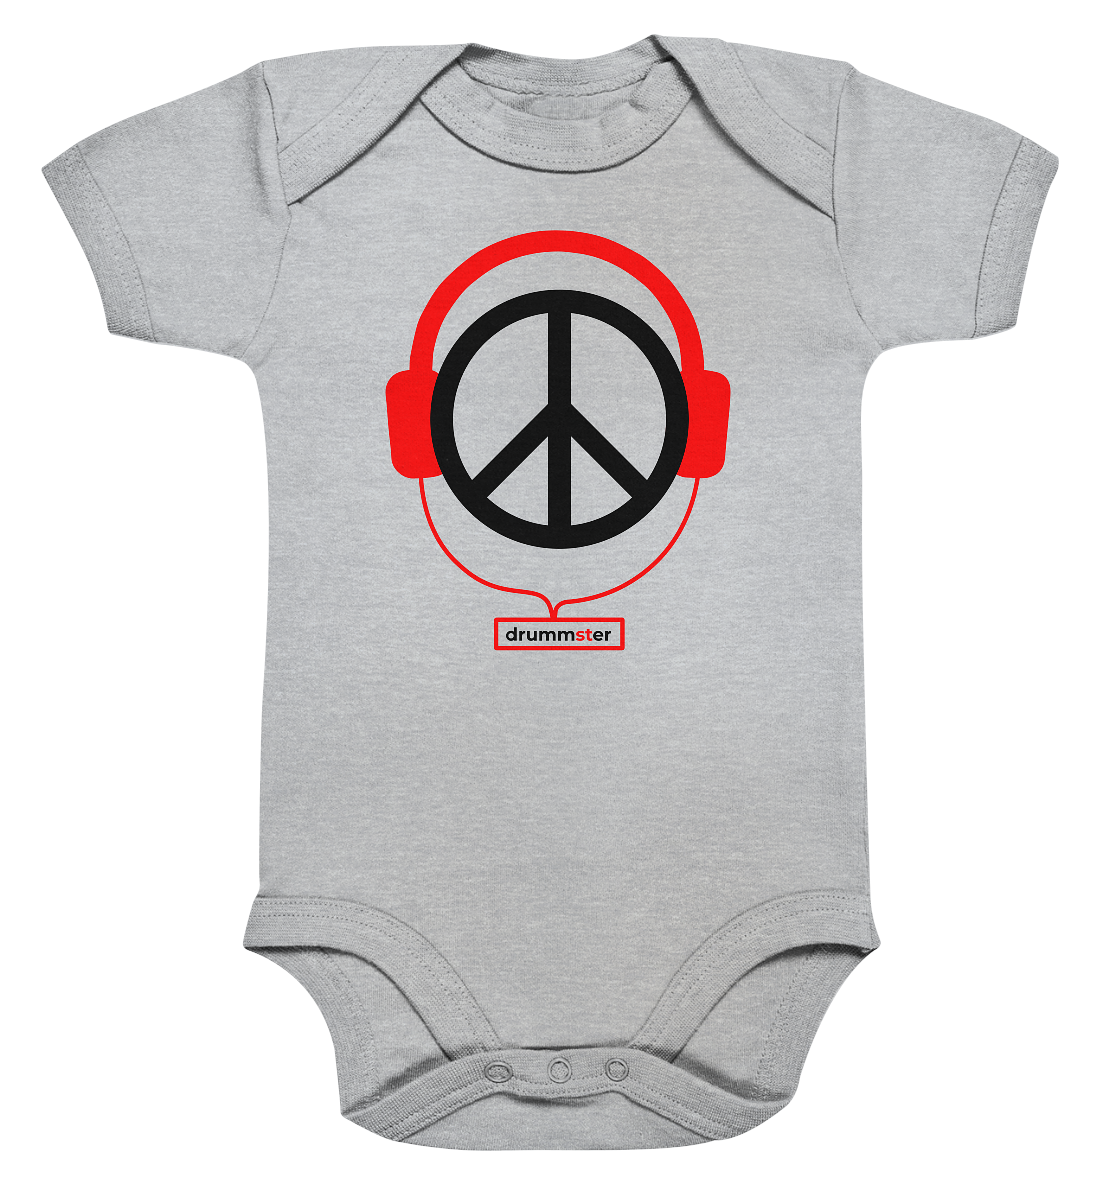 sound of peace - baby bodysuite | various colors